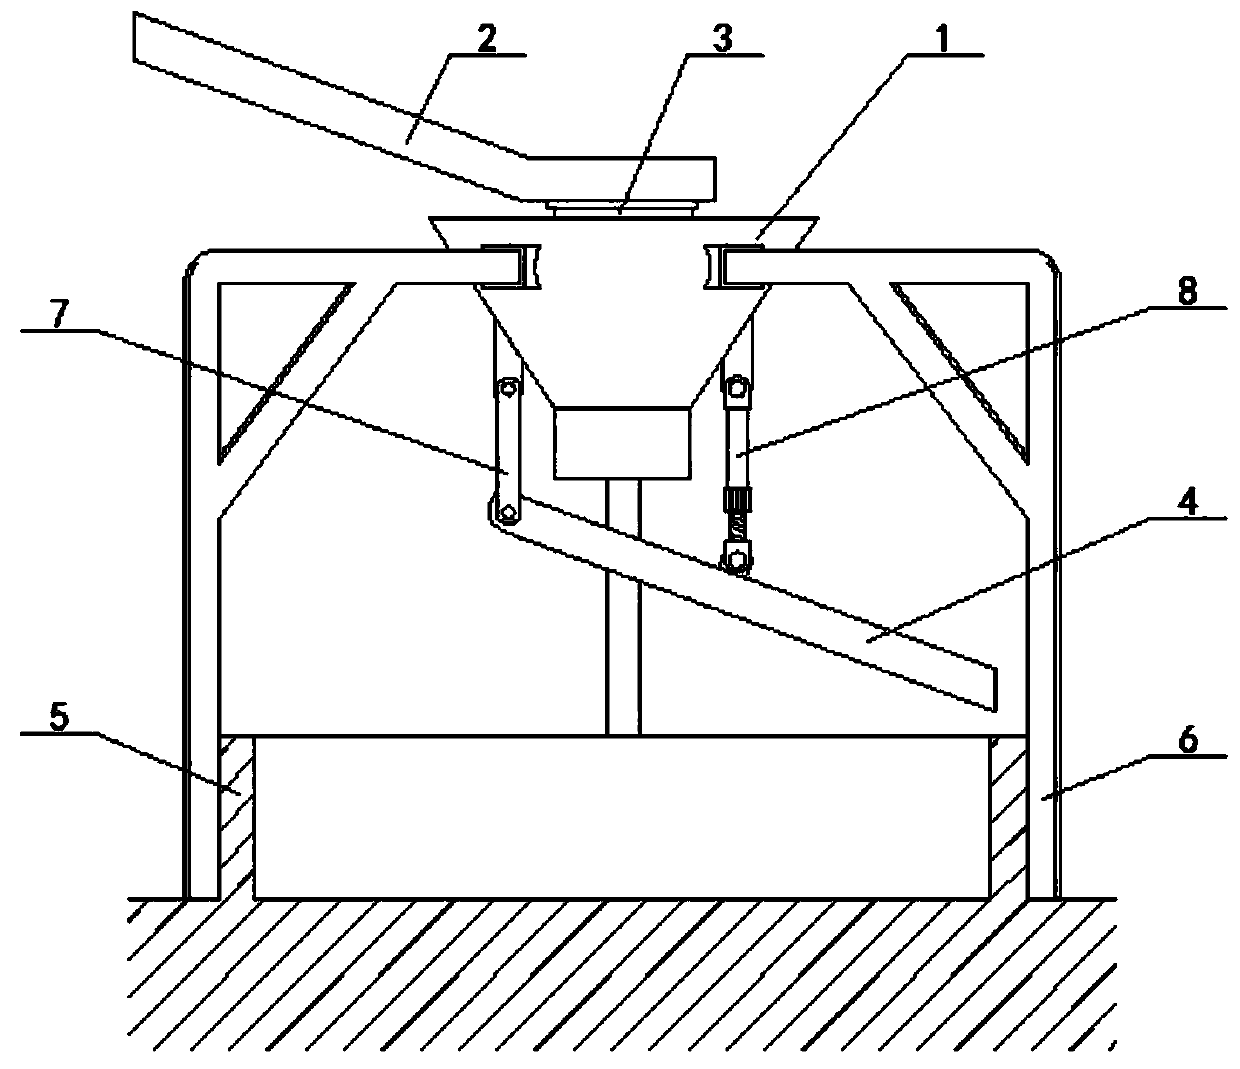 360-degree rotating chute used for open caisson concrete pouring